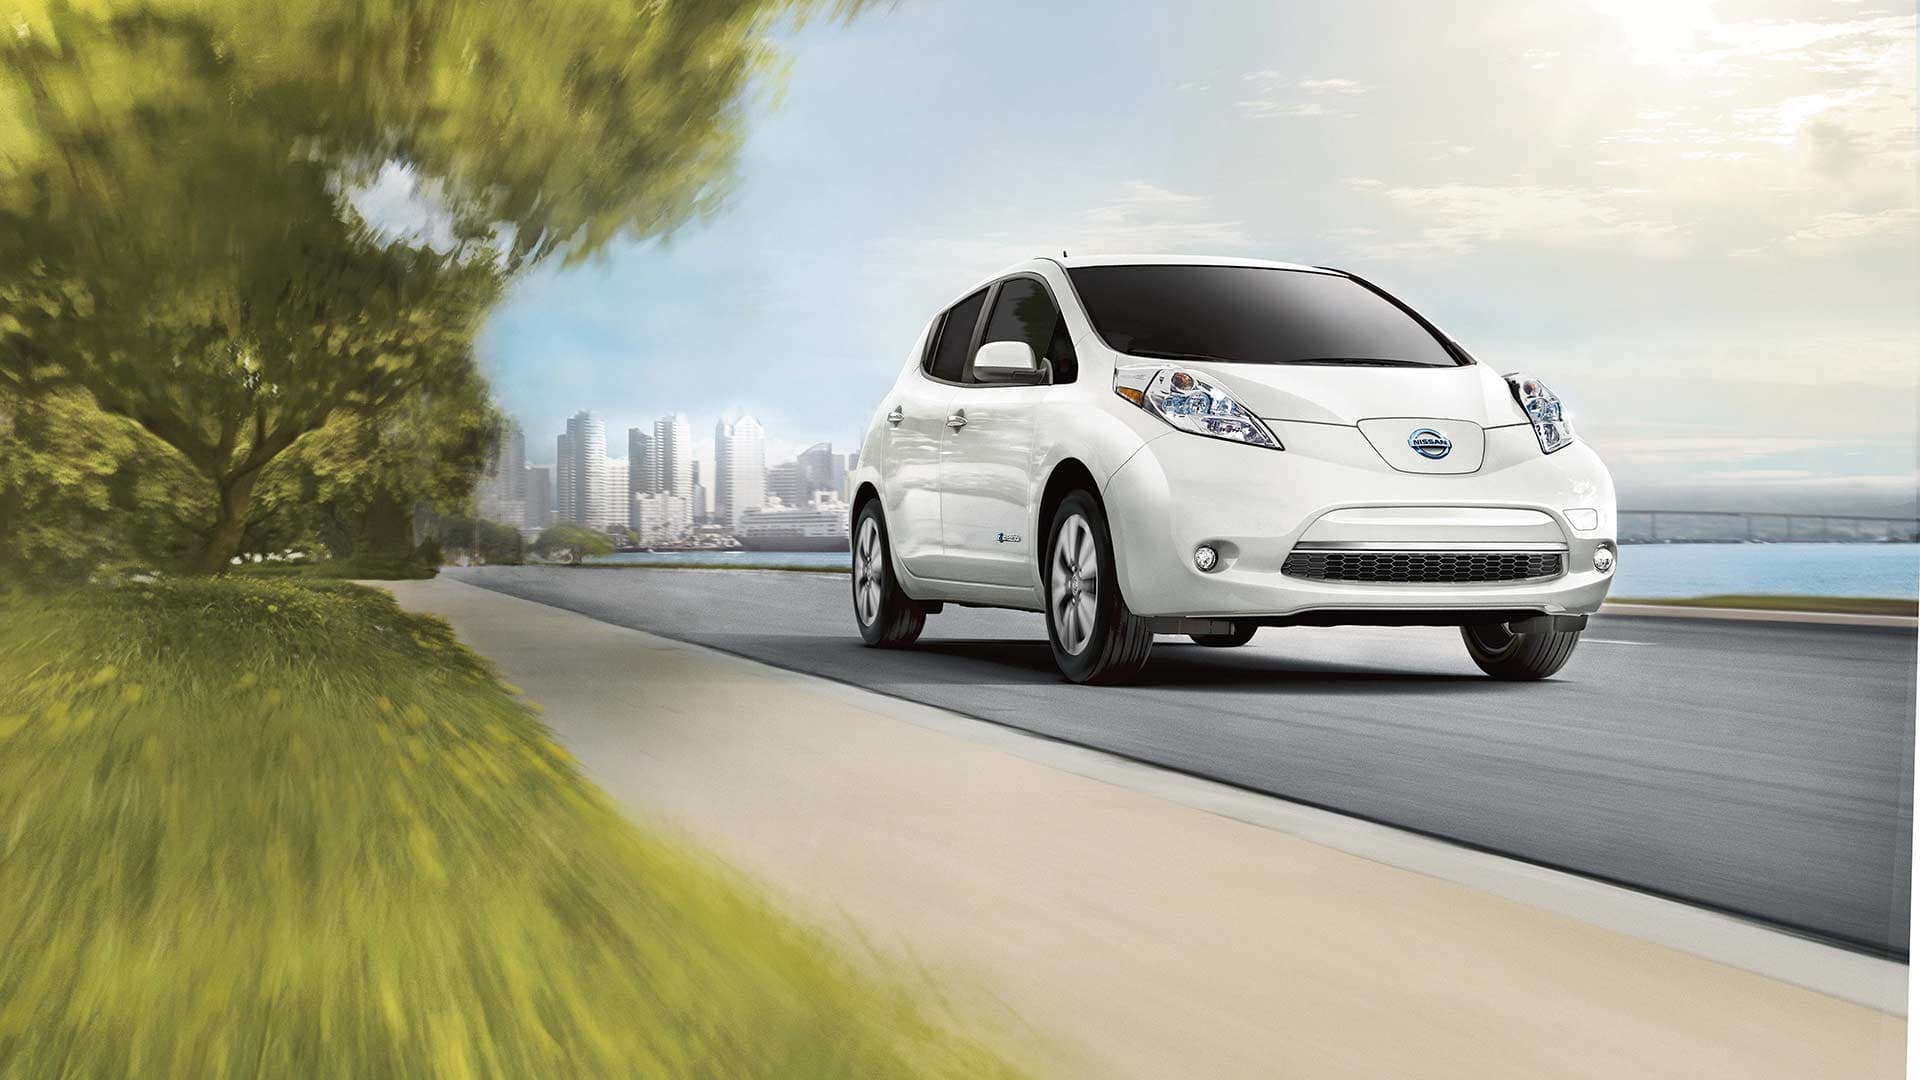 Nissan Tweets its All-New Leaf Will Be Revealed in September